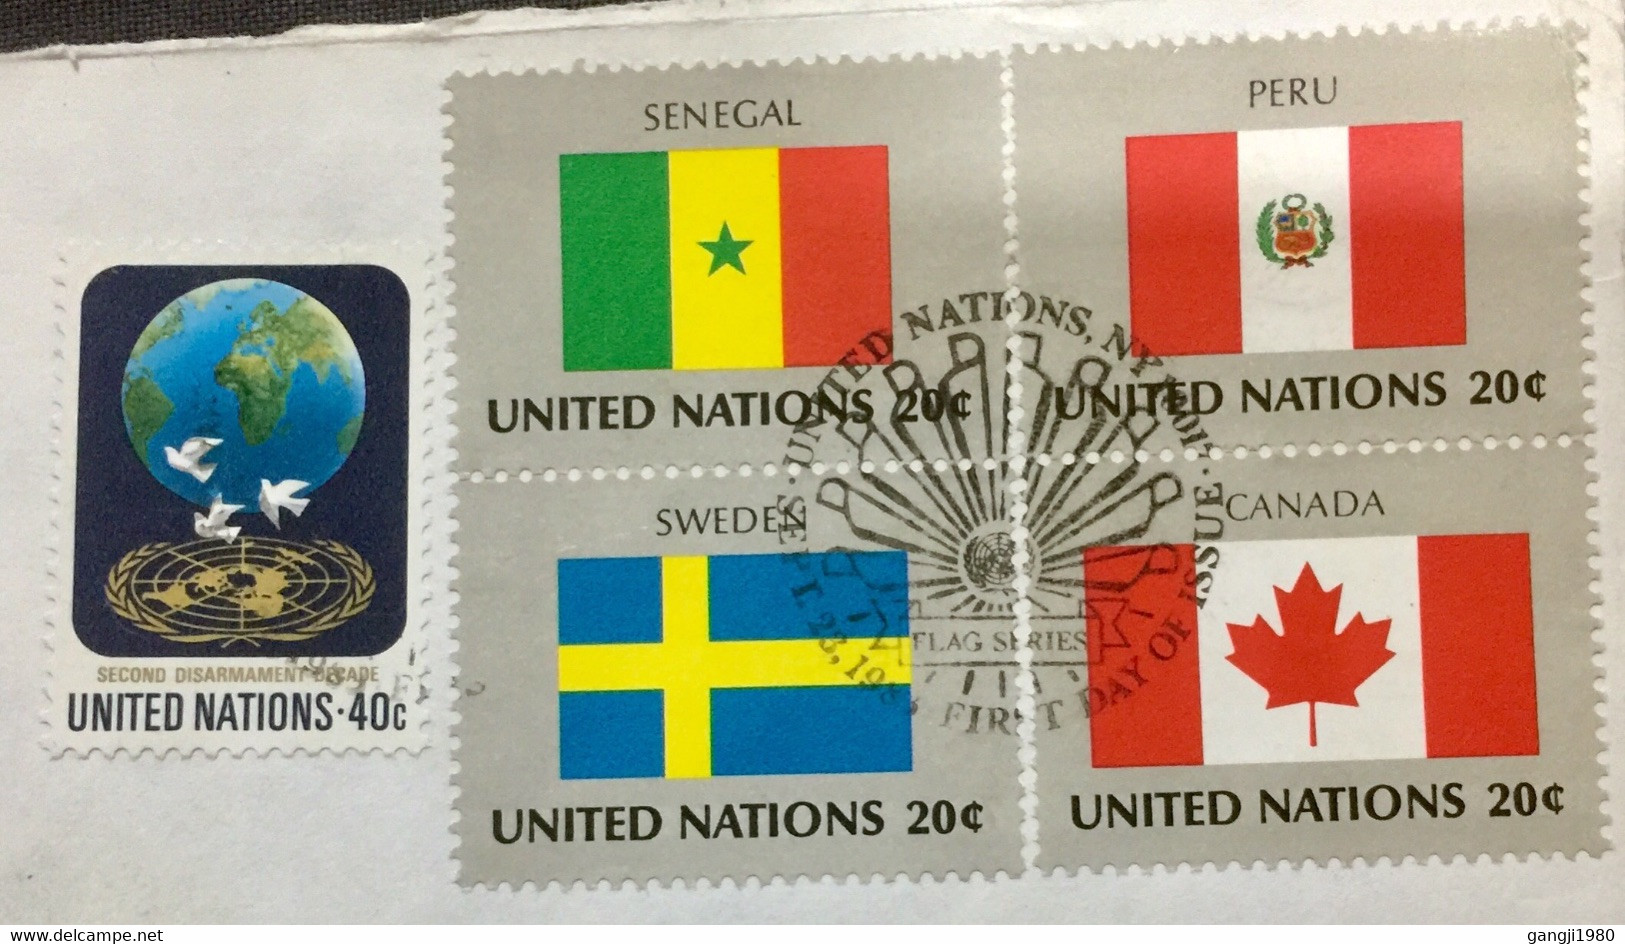 UNITED NATION 2003, FRONT ONLY WITH 5 DIFFERENT STAMPS USED TO SCOTLAND FLAG OF SENEGAL, PERU ,SWEDEN,CANADA COUNTRIES, - Briefe U. Dokumente